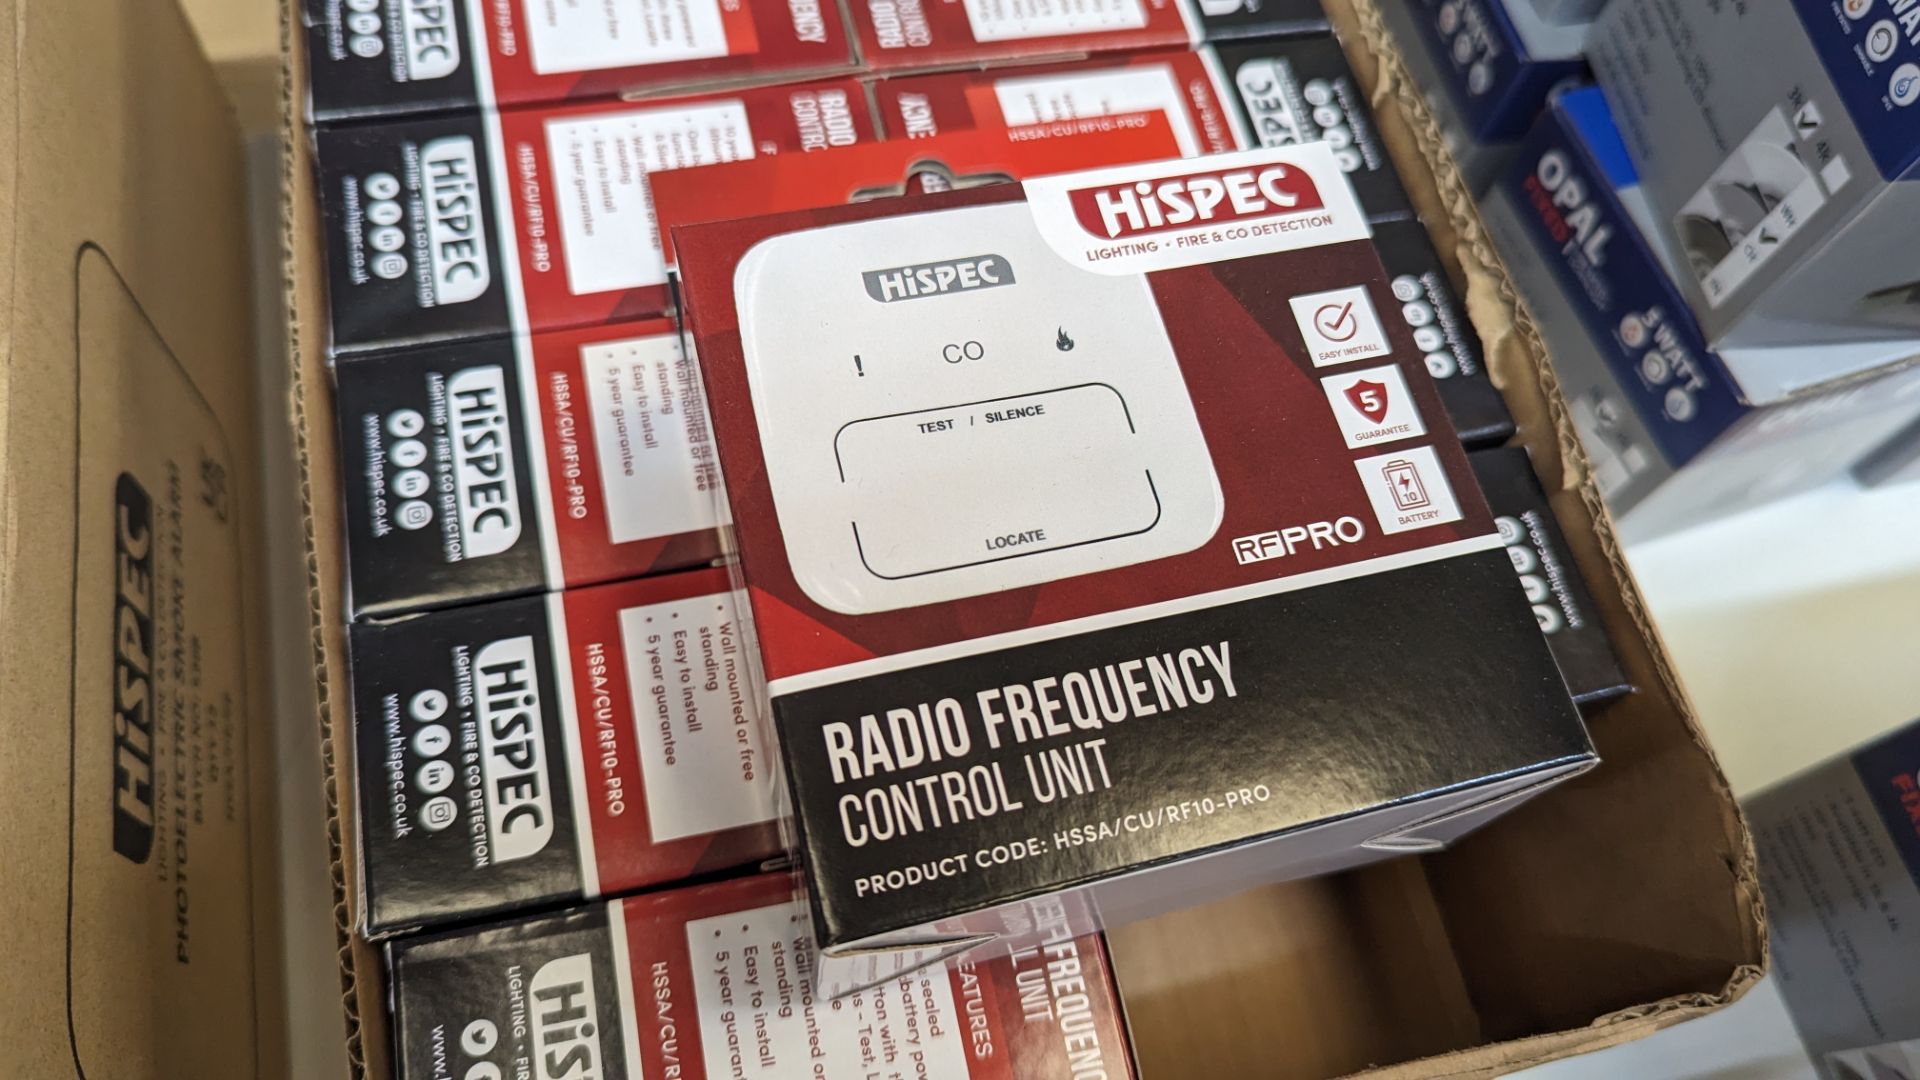 12 off Hispec radio frequency control units - Image 2 of 2